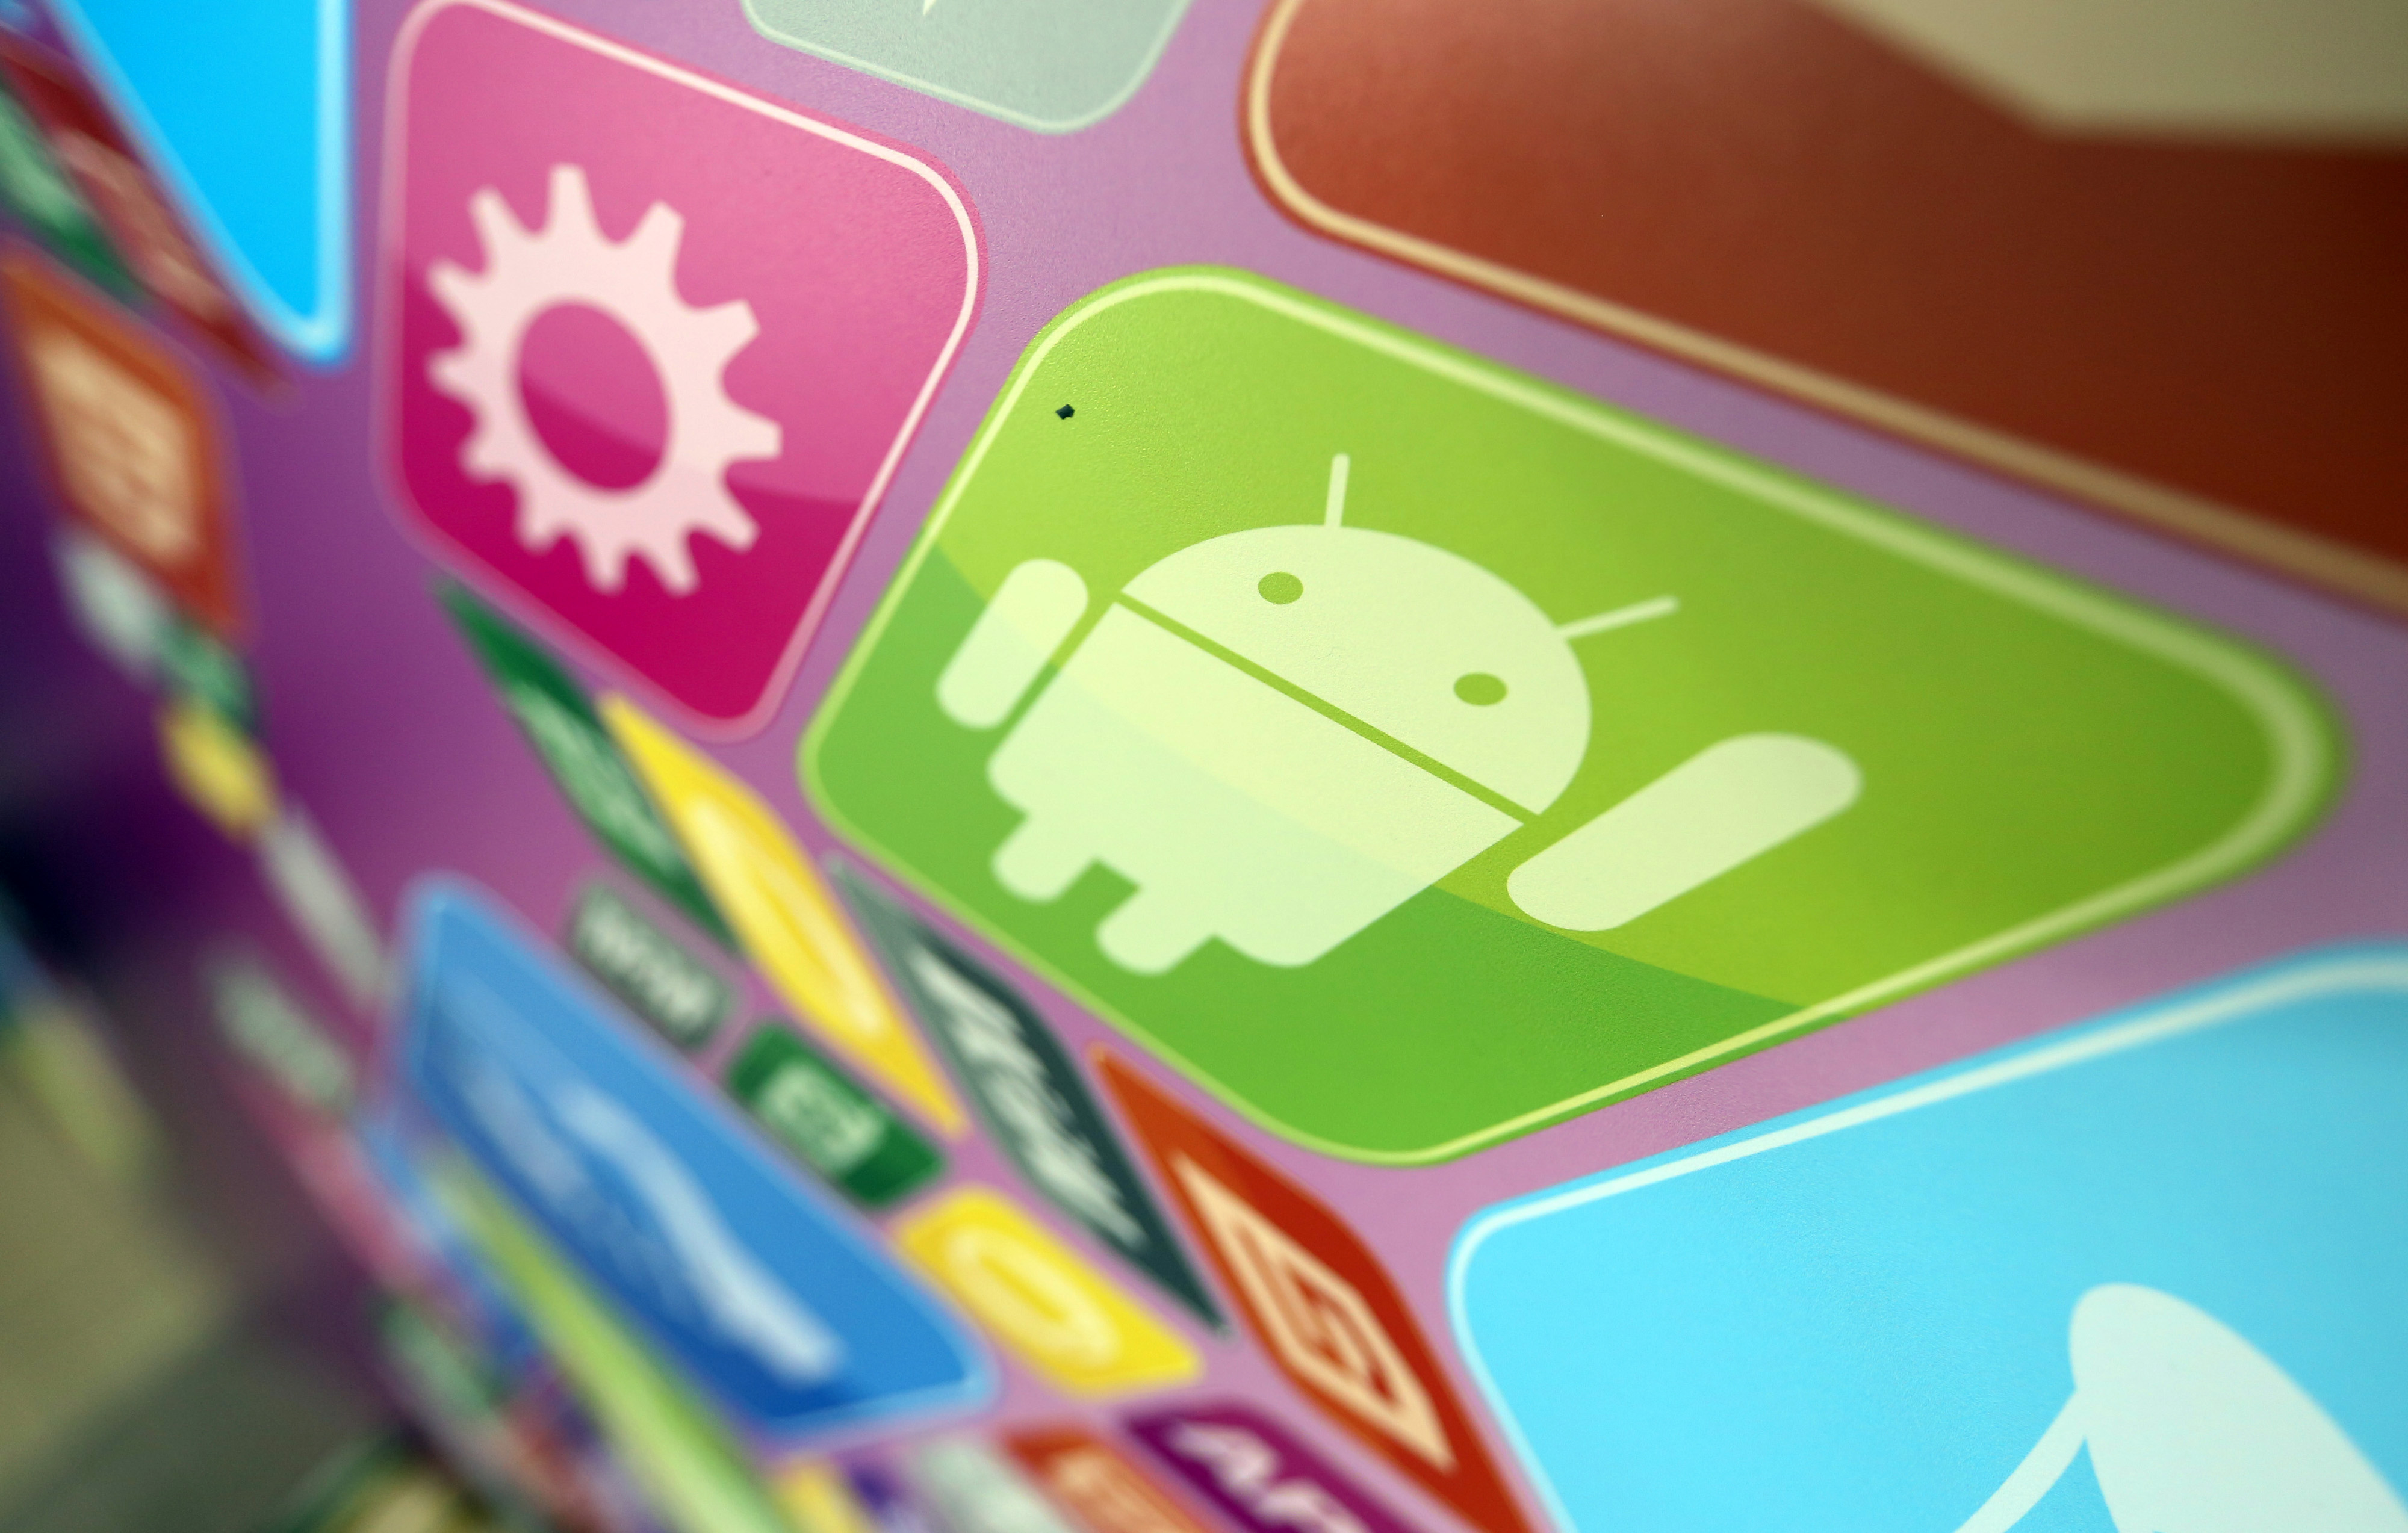 Google's Android platform is vulnerable to the attack. (Chris Ratcliffe—Bloomberg / Getty Images)